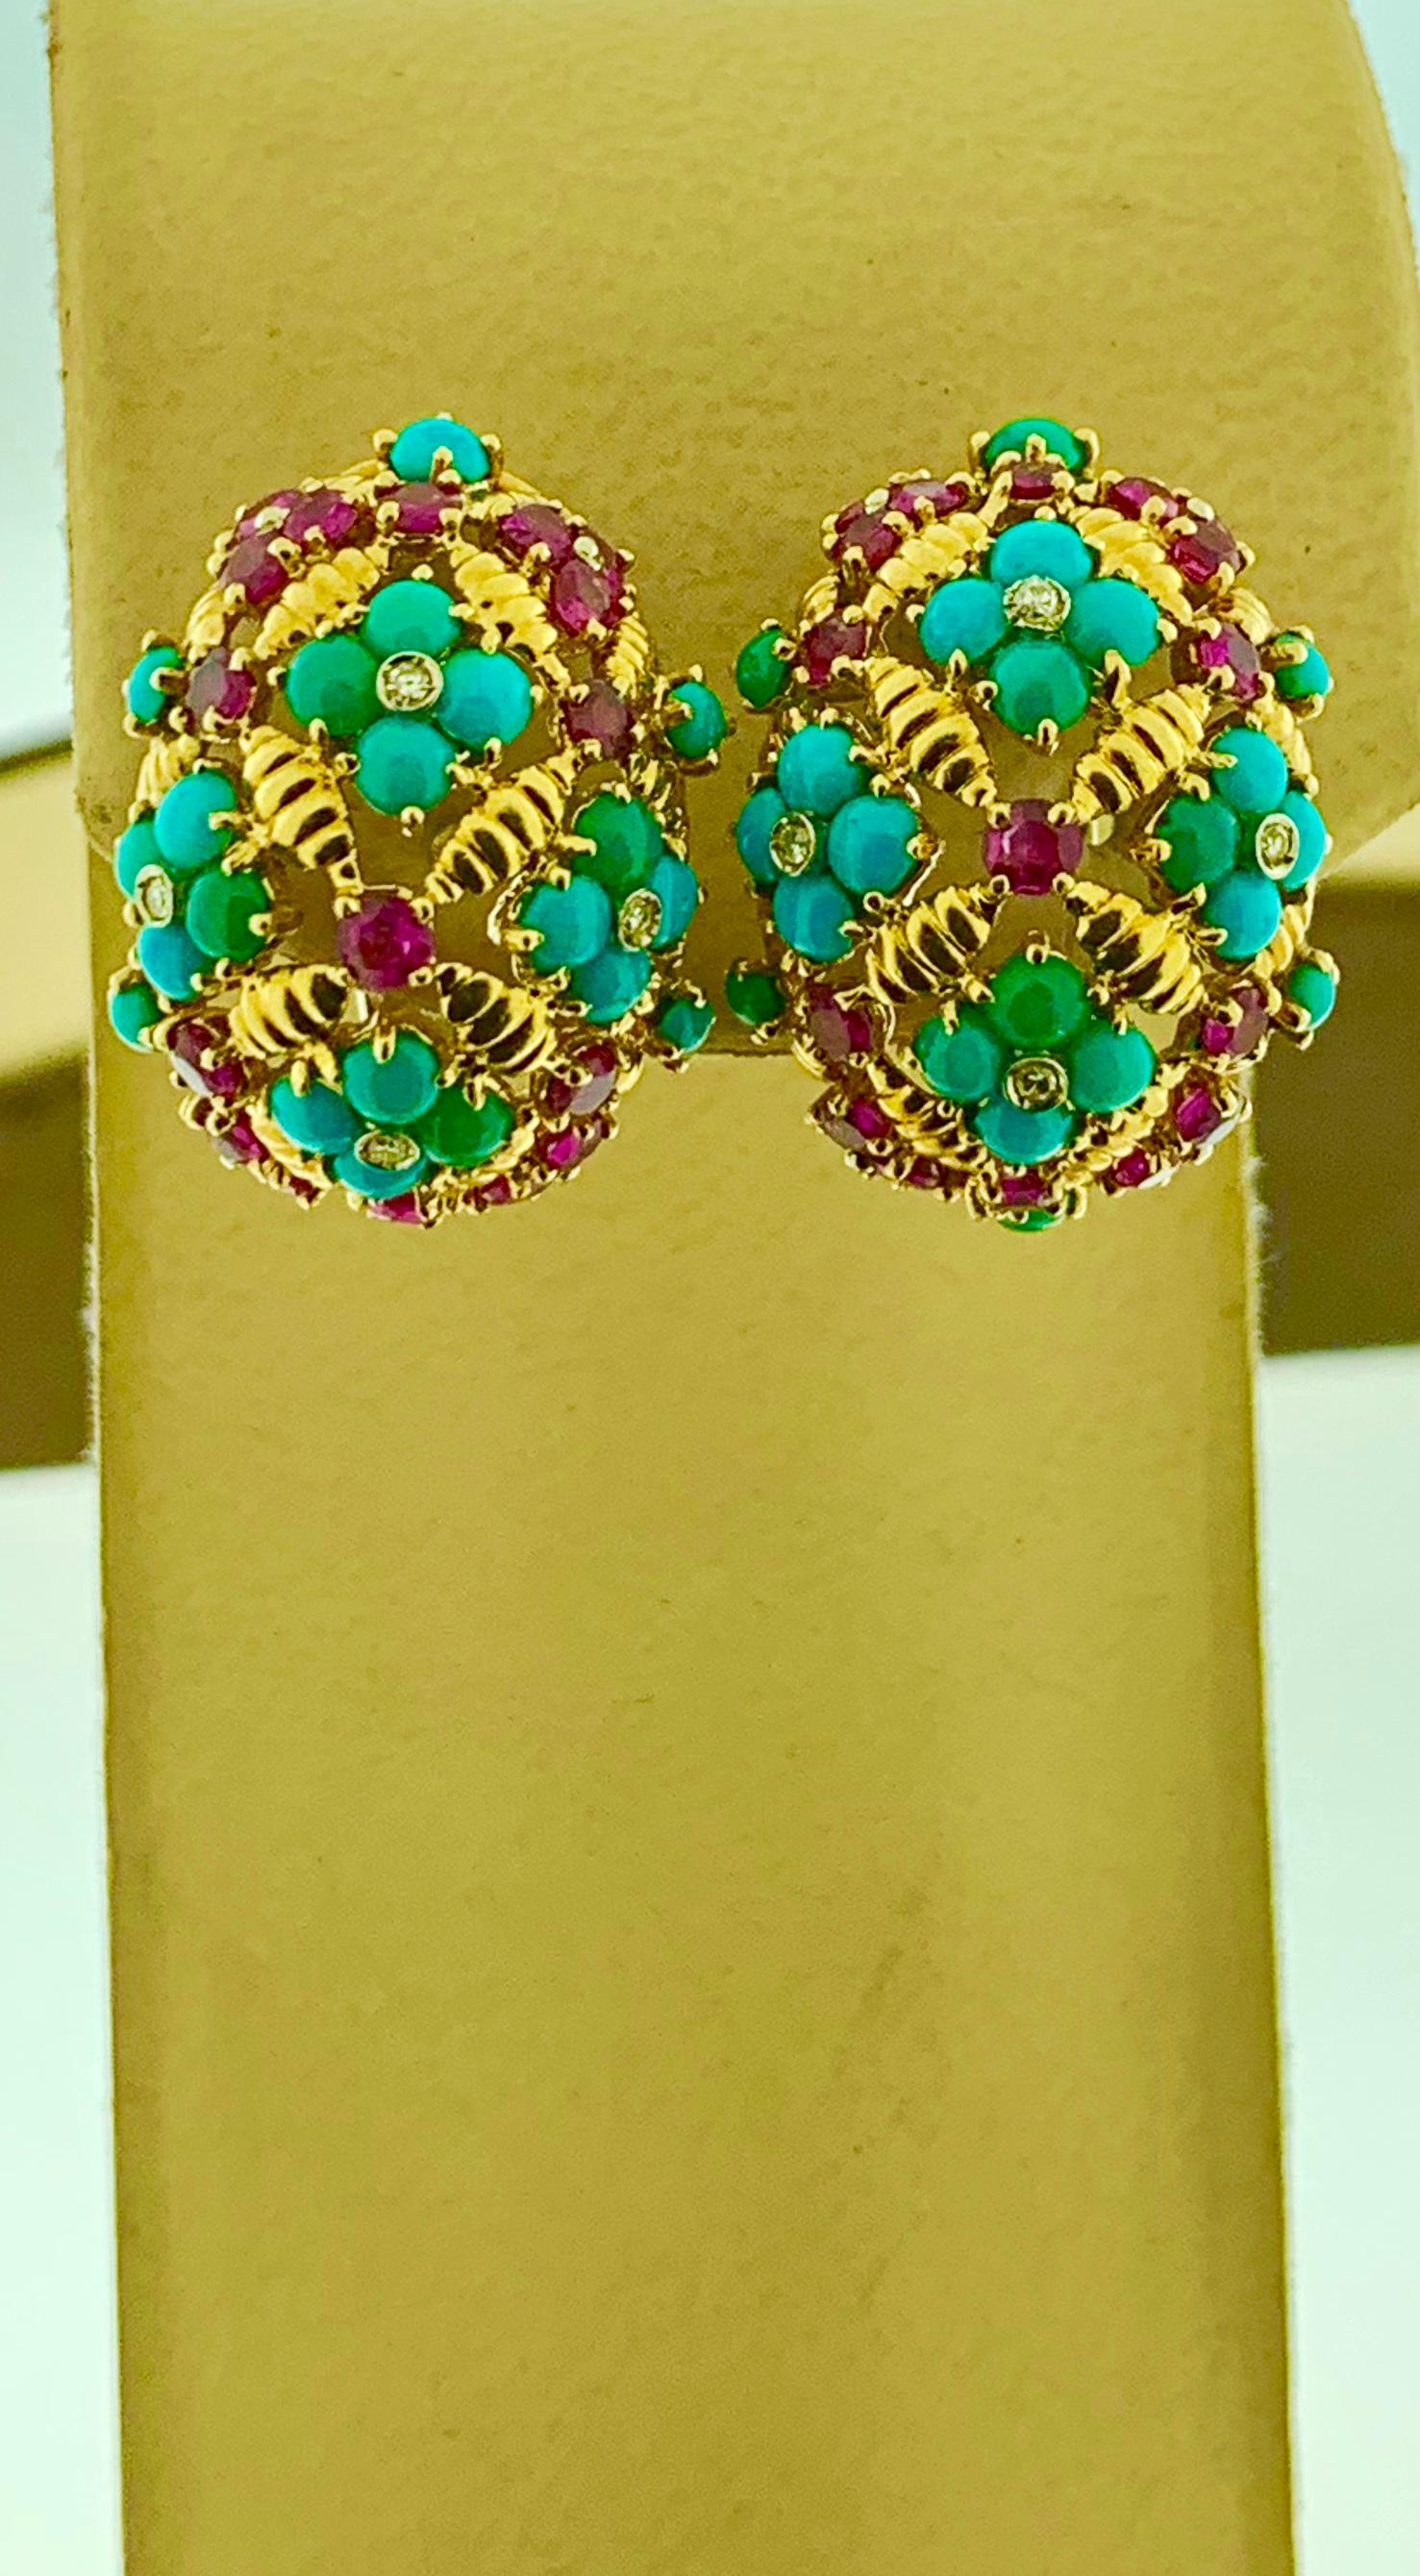 
Diamond Ruby & Turquoise  Clip Earrings In 18 Karat Yellow Gold 17 Grams
This exquisite pair of earrings are beautifully crafted with 18 karat  Yellow gold .
Weight of 18 K gold 17.10 grams, earrings are stamped for 18 K 
 Fine  Round Cut Ruby